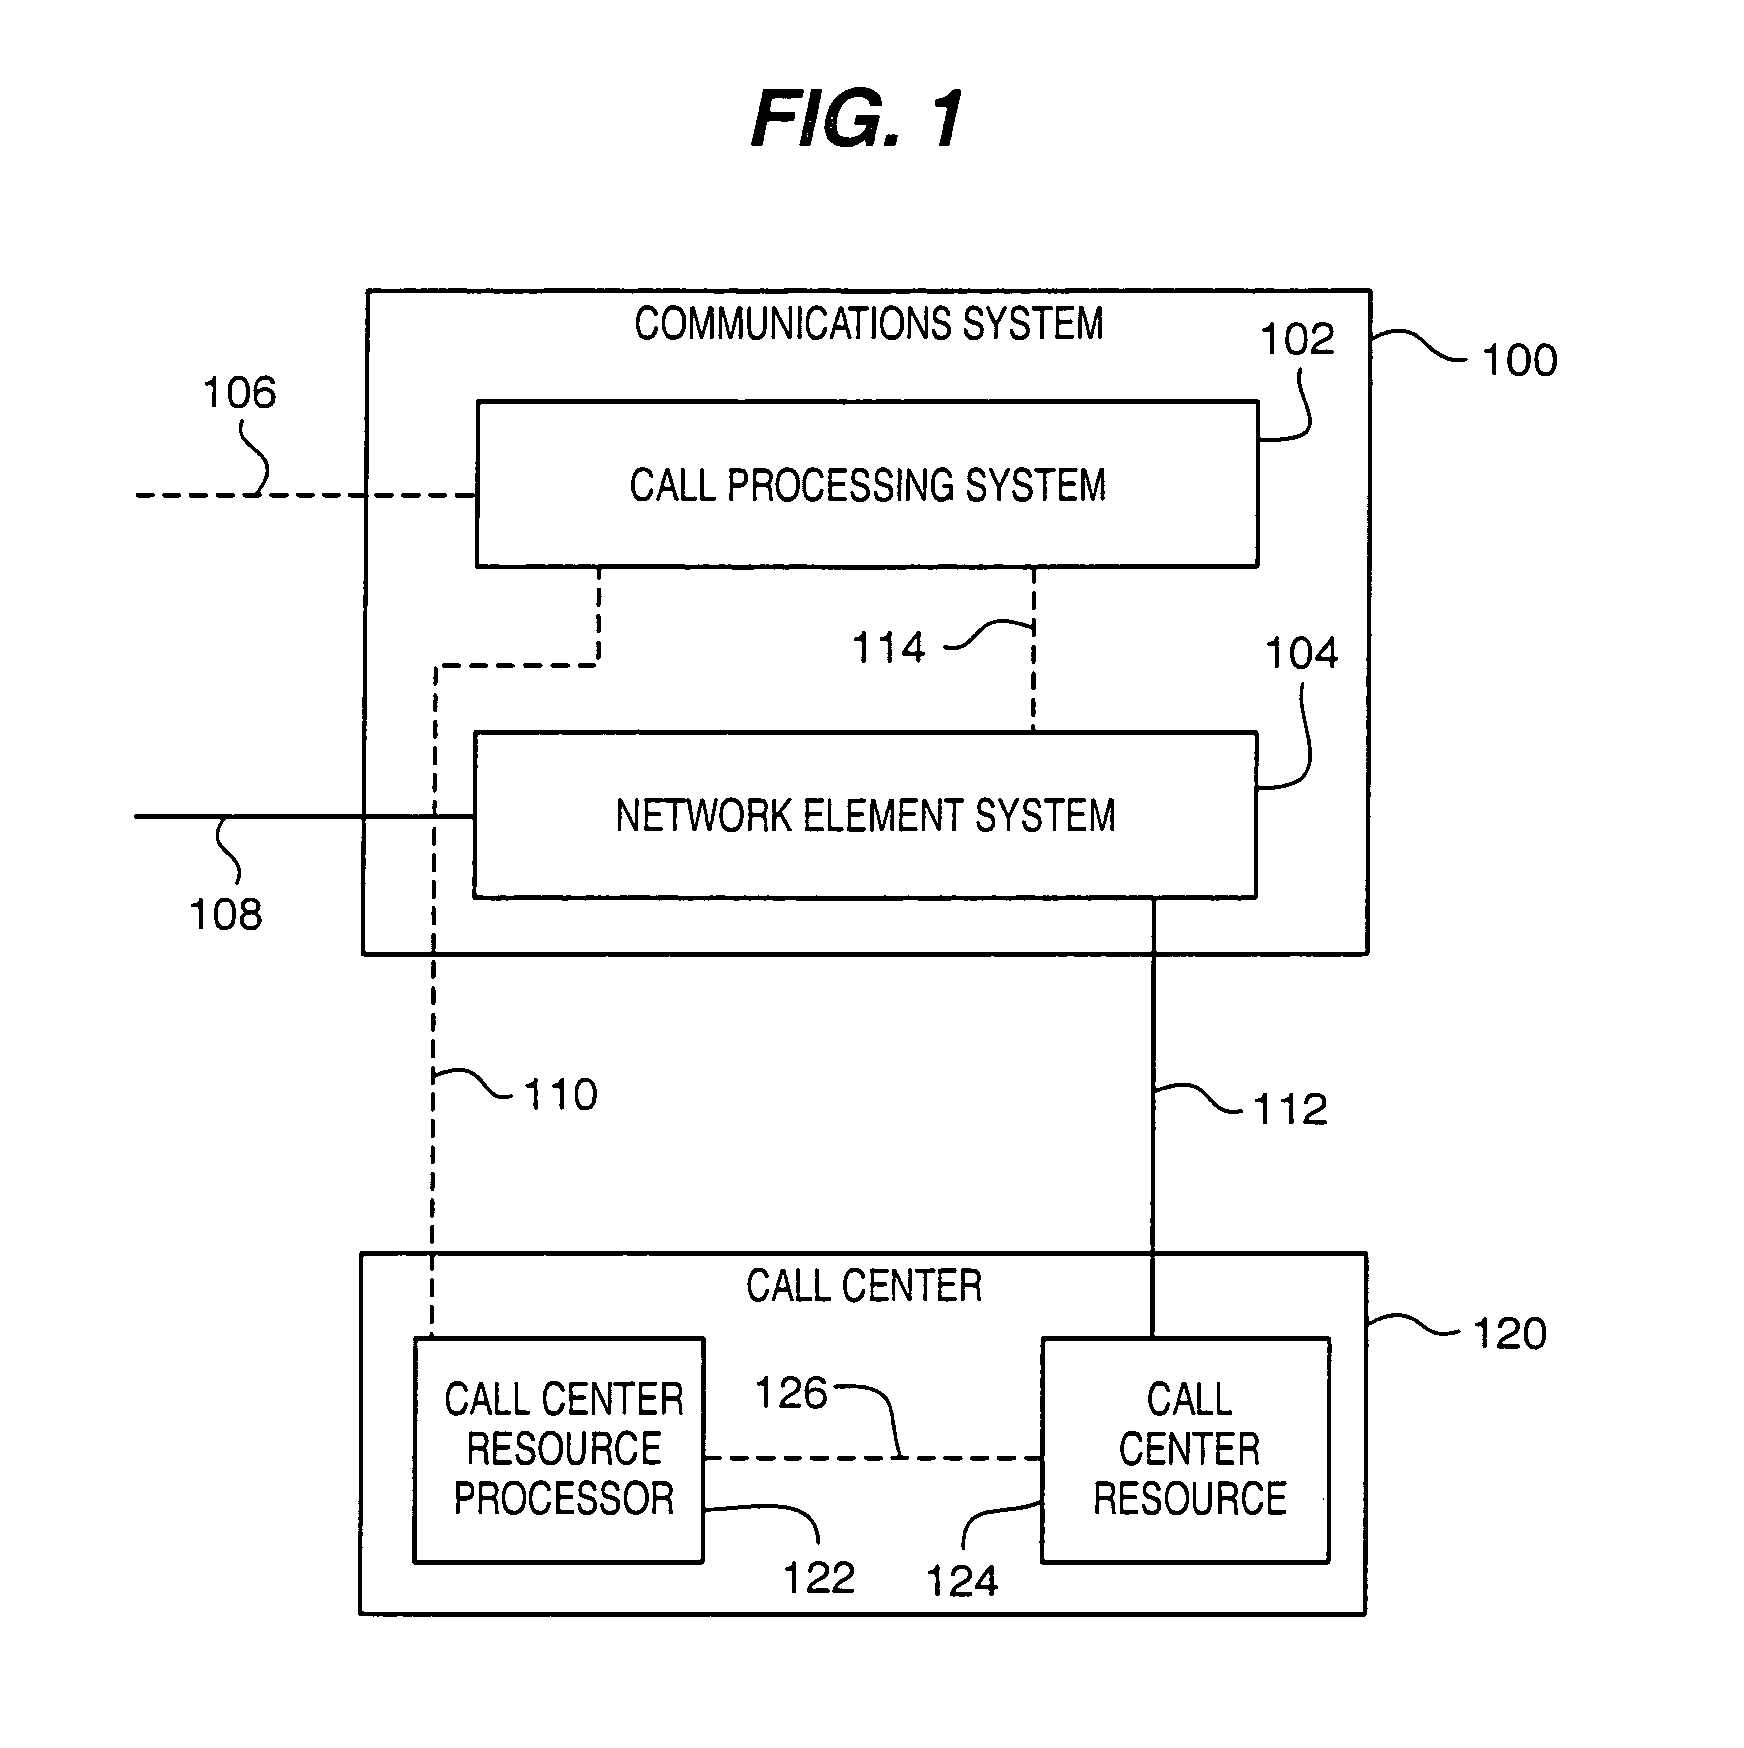 Call processing system and service control point for handling calls to a call center